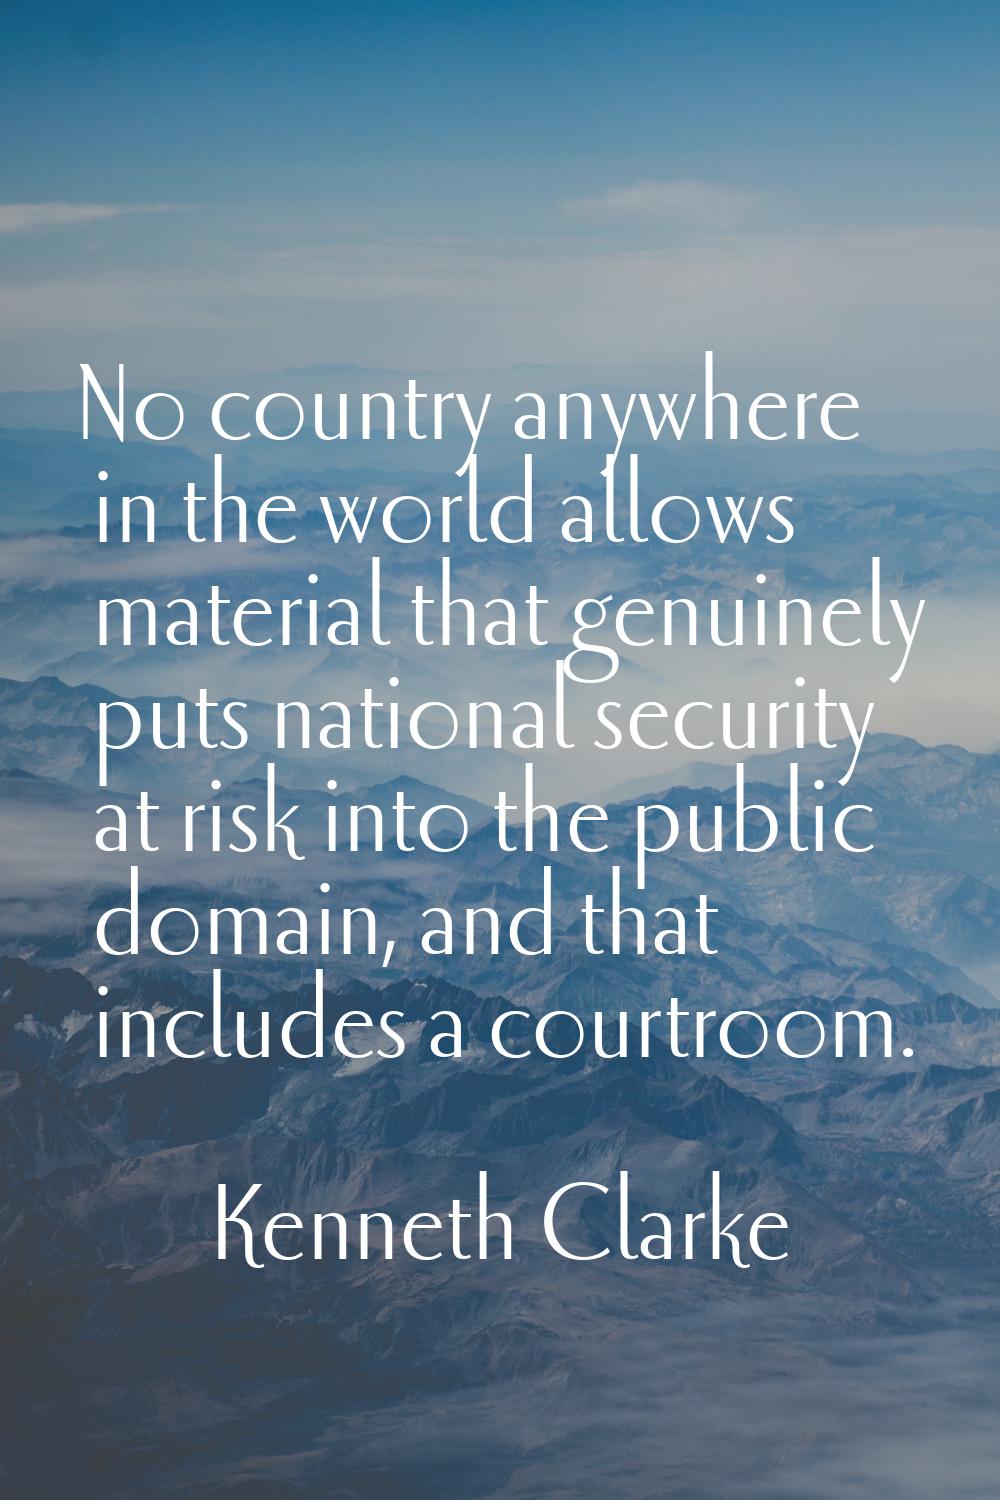 No country anywhere in the world allows material that genuinely puts national security at risk into